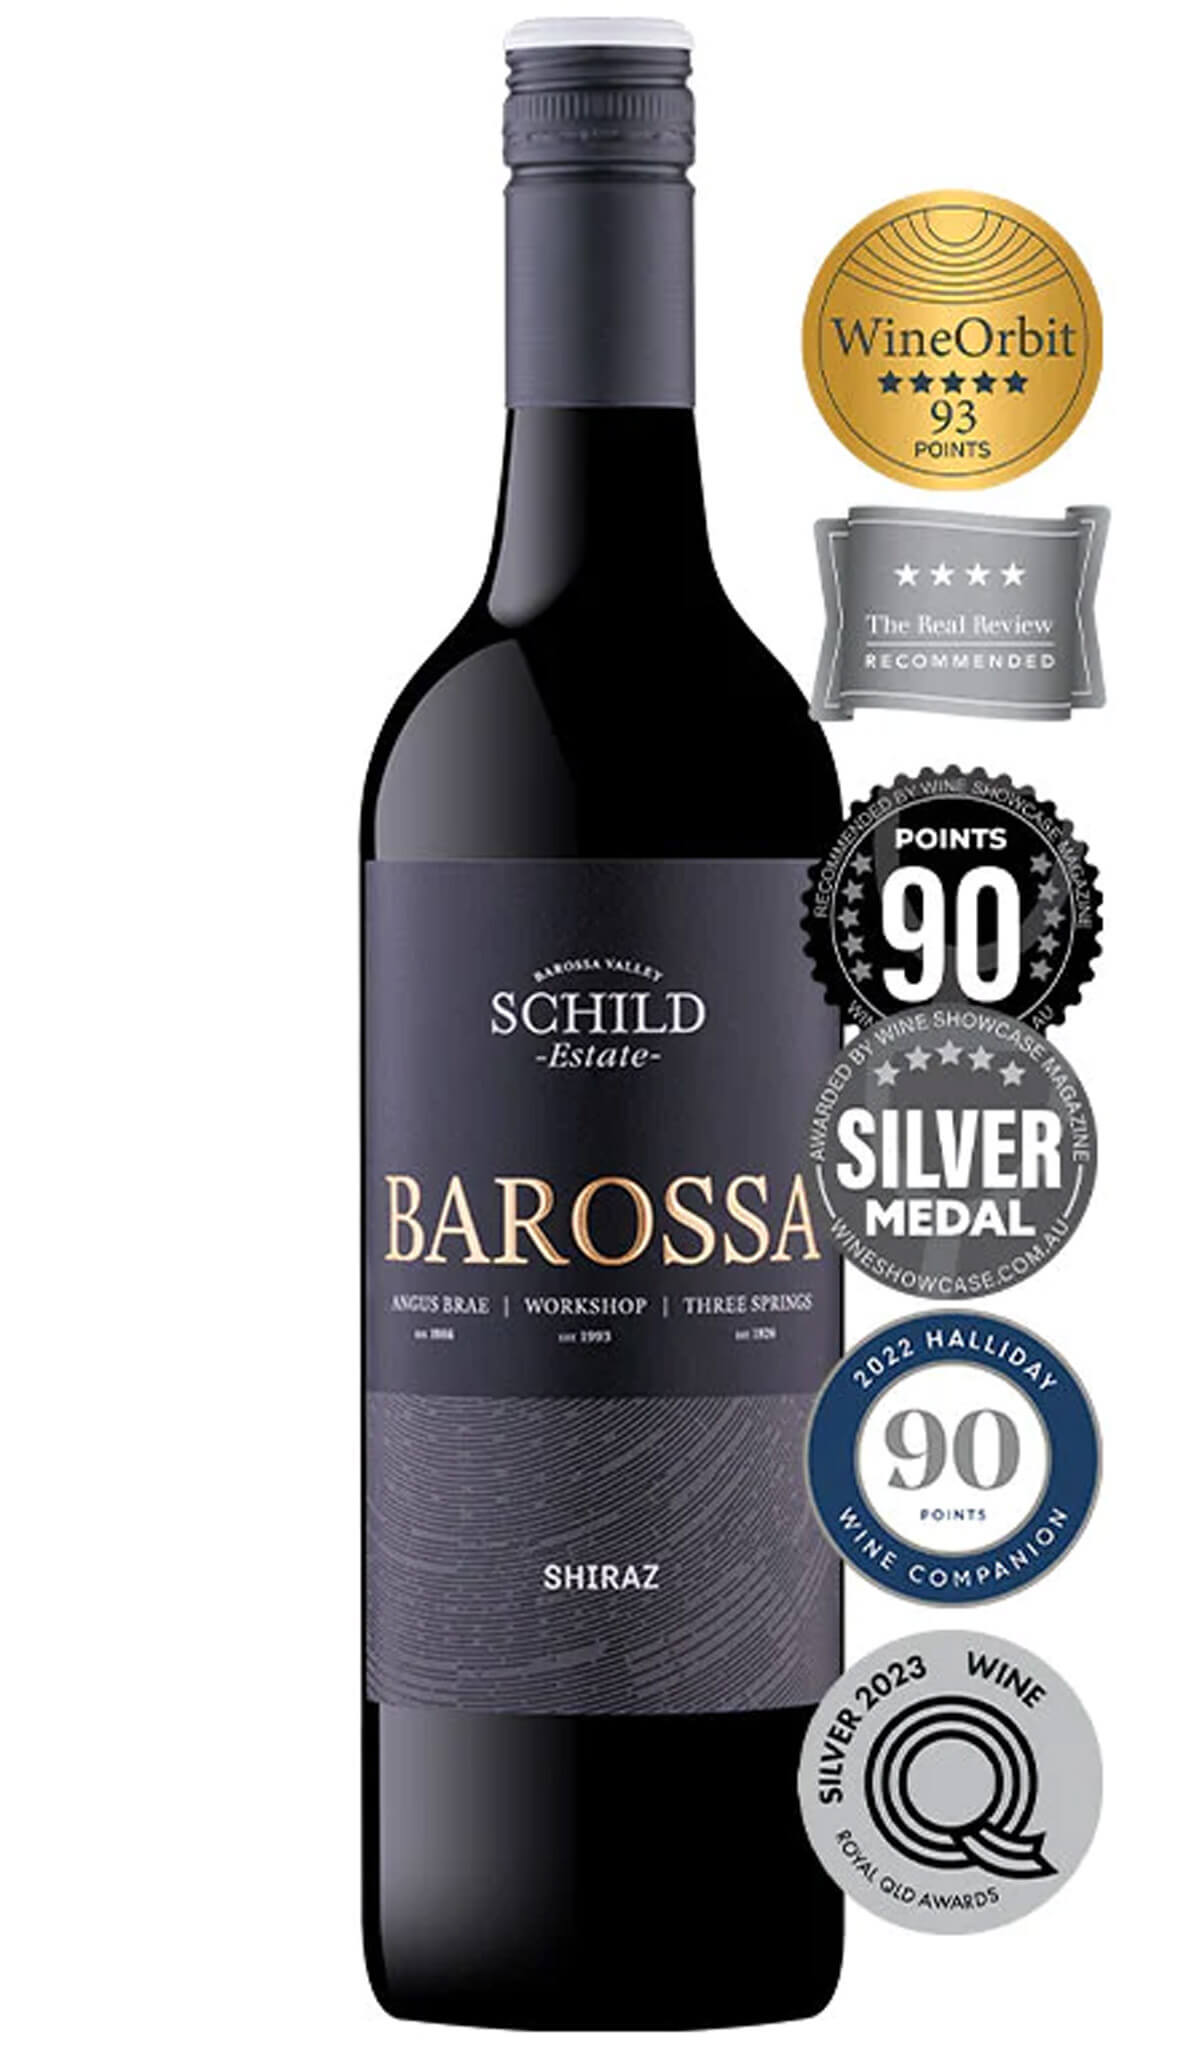 Find out more or buy Schild Estate Shiraz 2020 (Barossa Valley) online at Wine Sellers Direct - Australia’s independent liquor specialists.